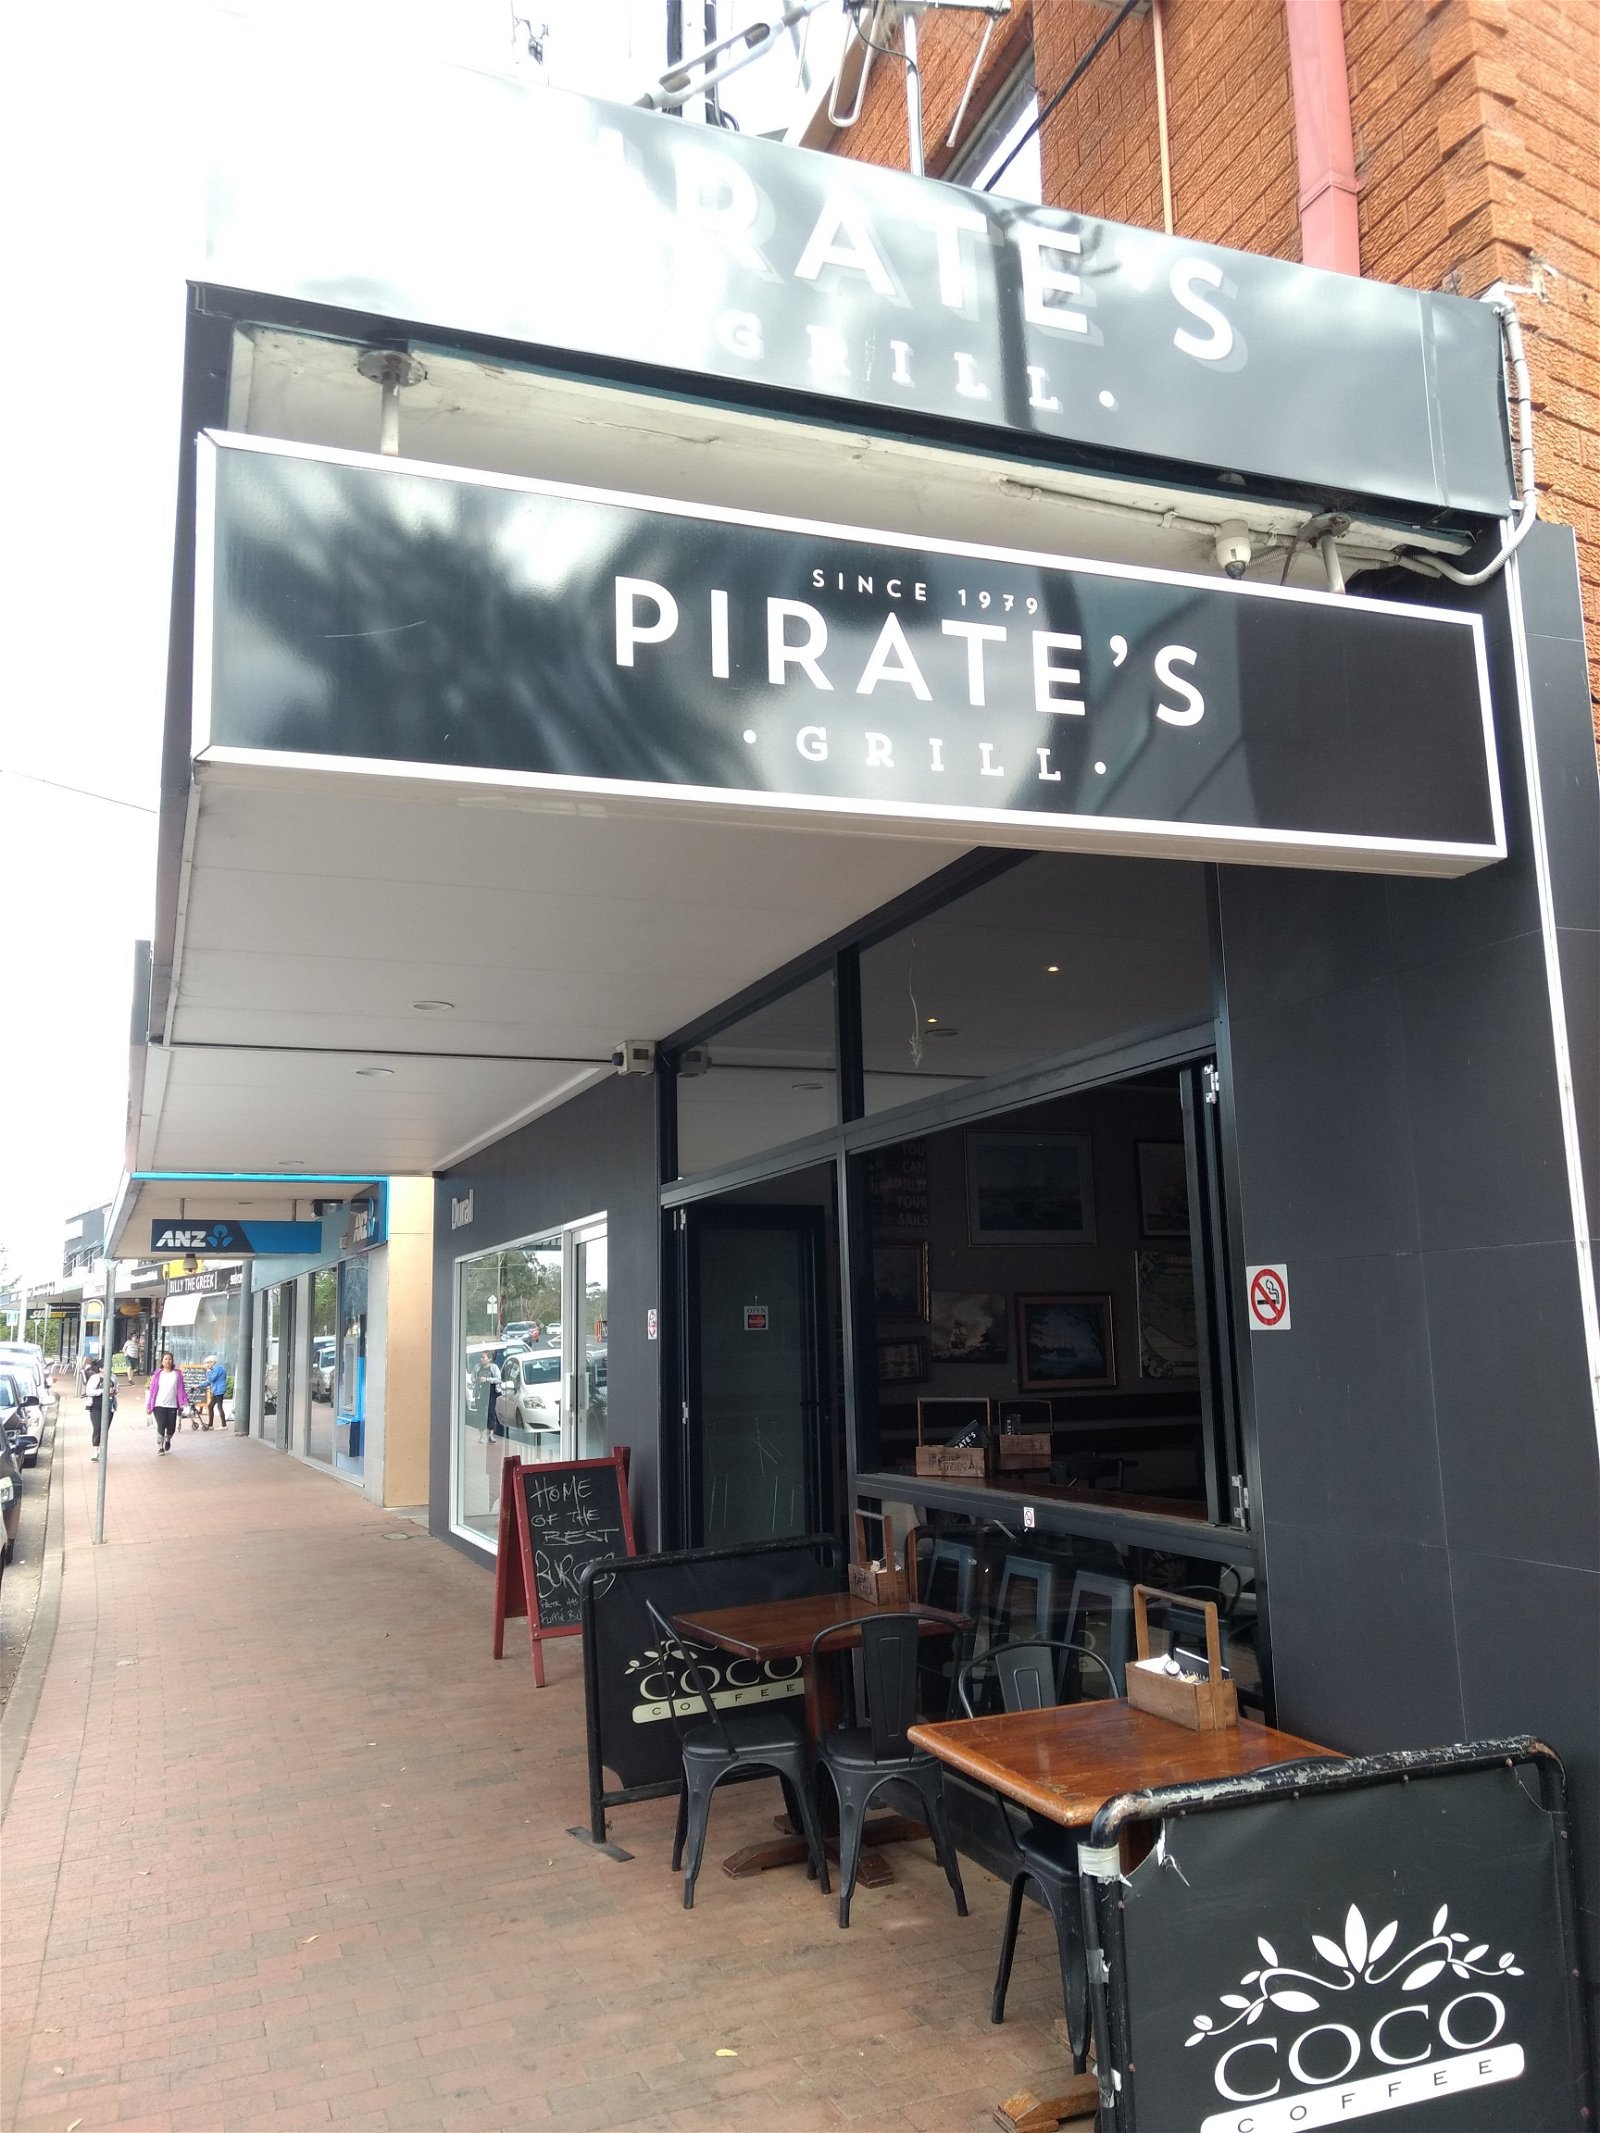 Pirate's Grill - Pubs Sydney